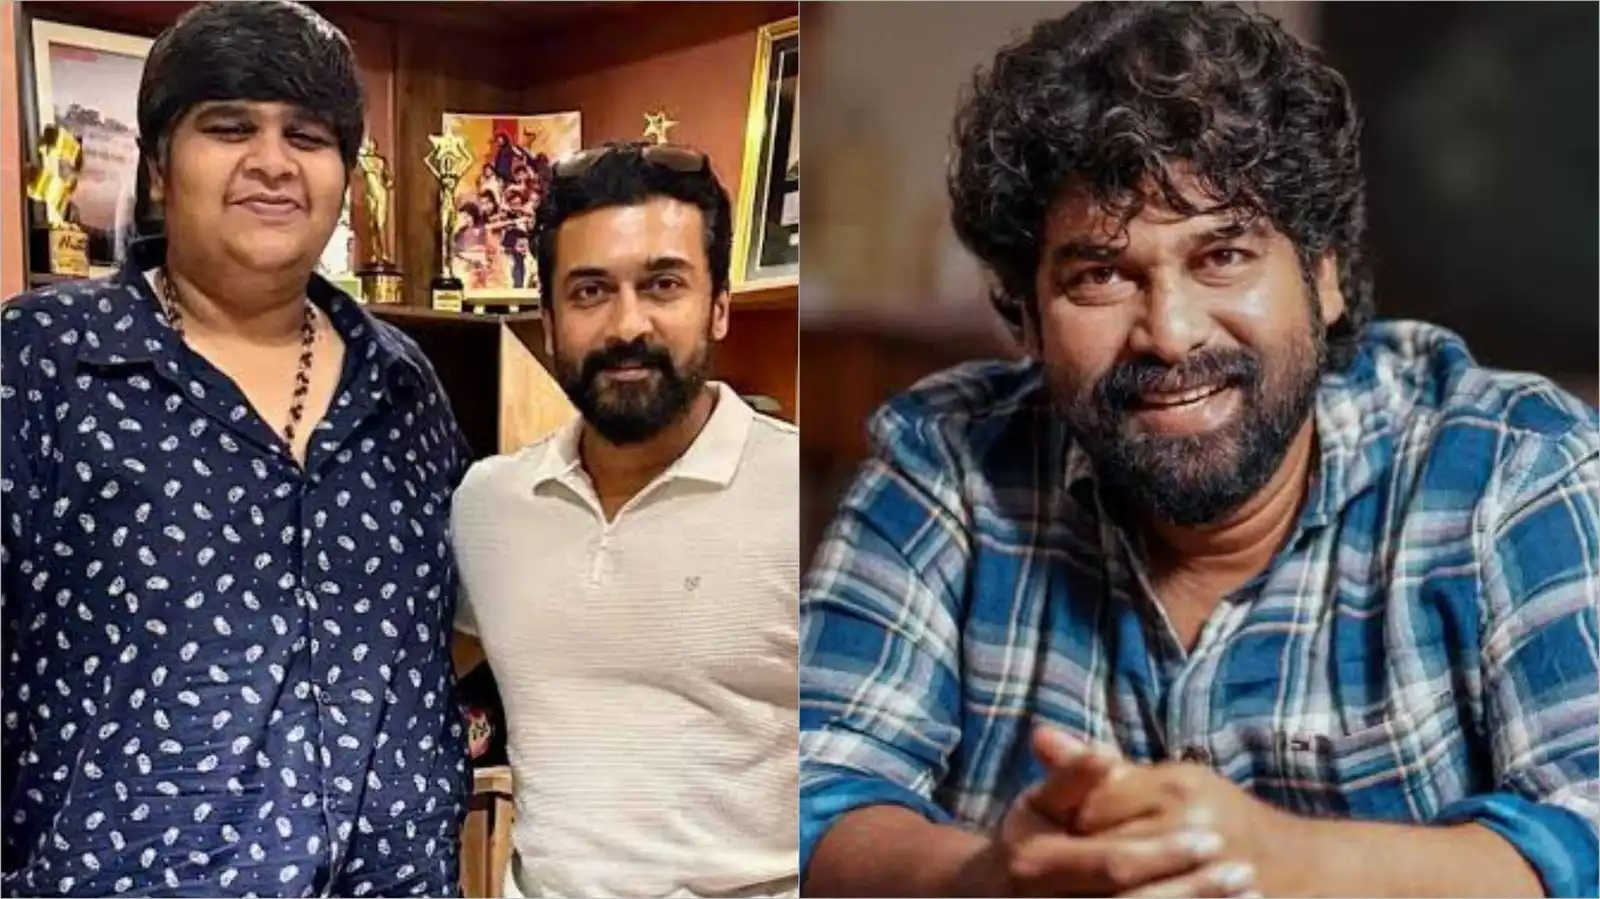 Suriya 44: This Malayalam actor to join forces with Karthik Subbaraj for the second time?